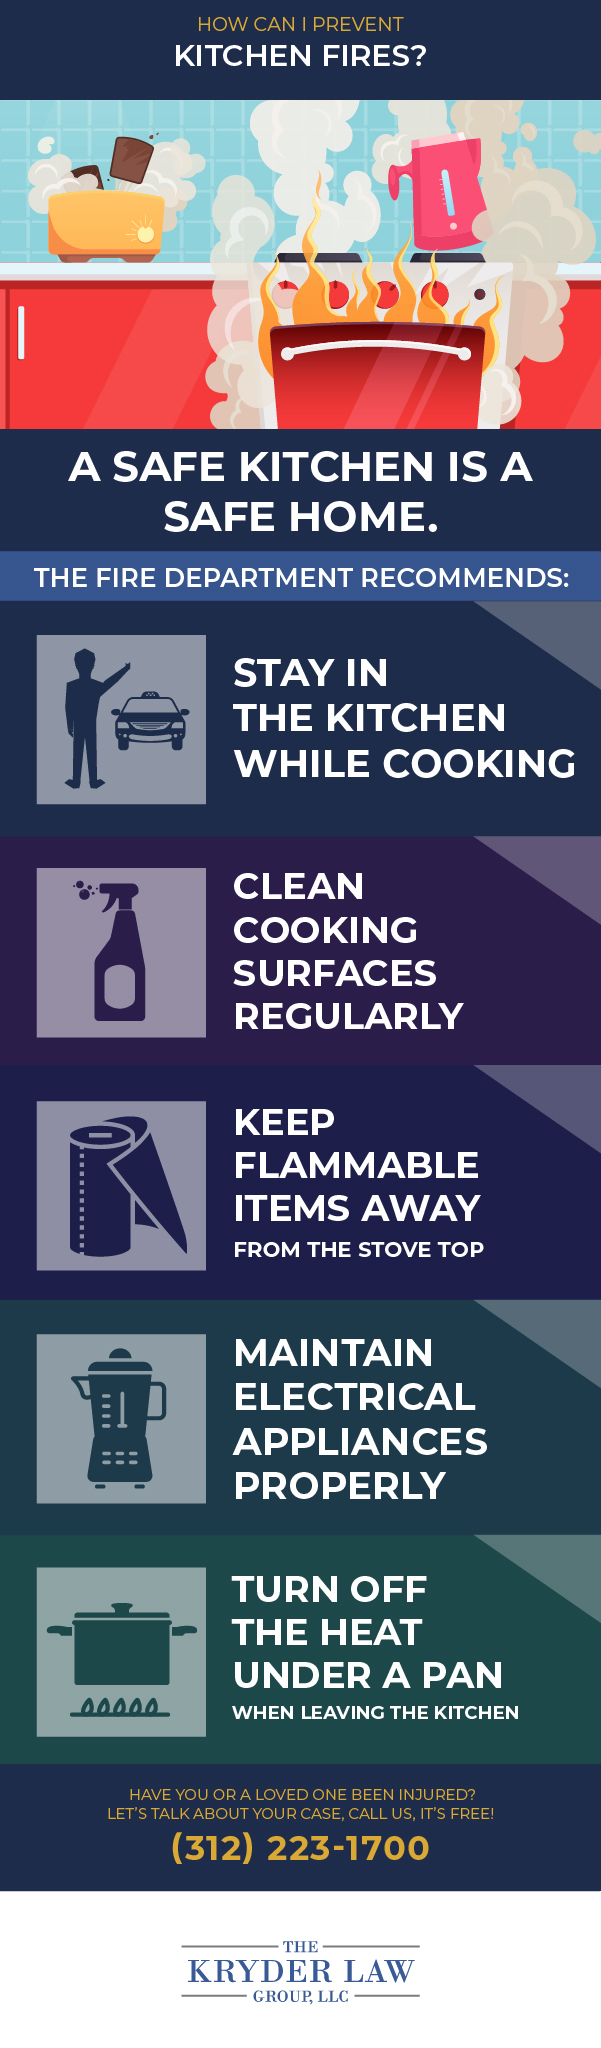 How Can I Prevent Kitchen Fires?